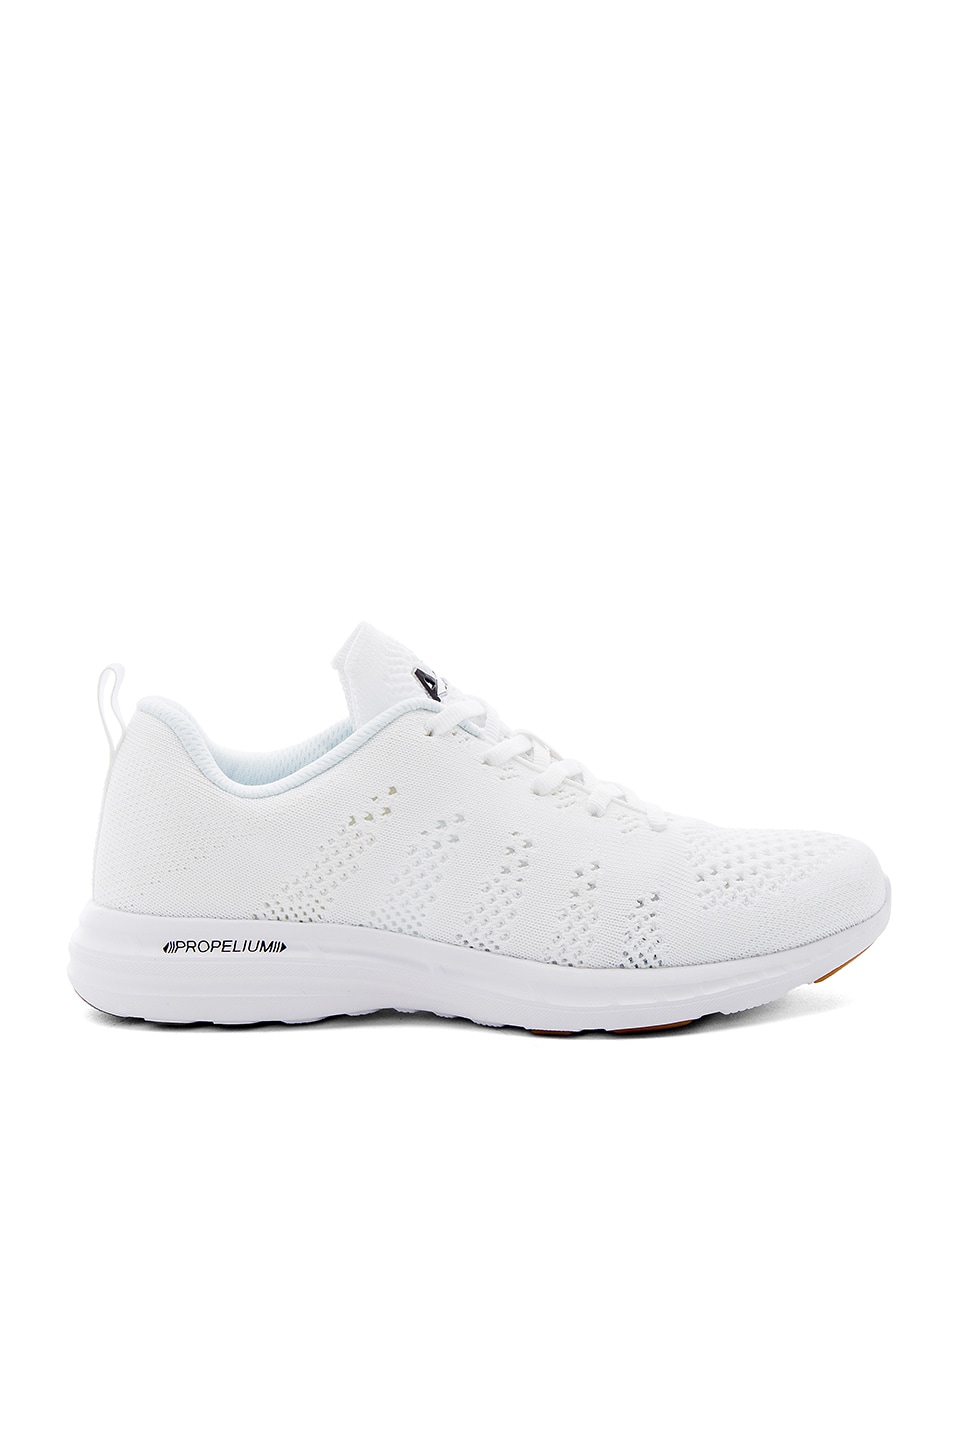 athletic propulsion labs techloom pro sneakers